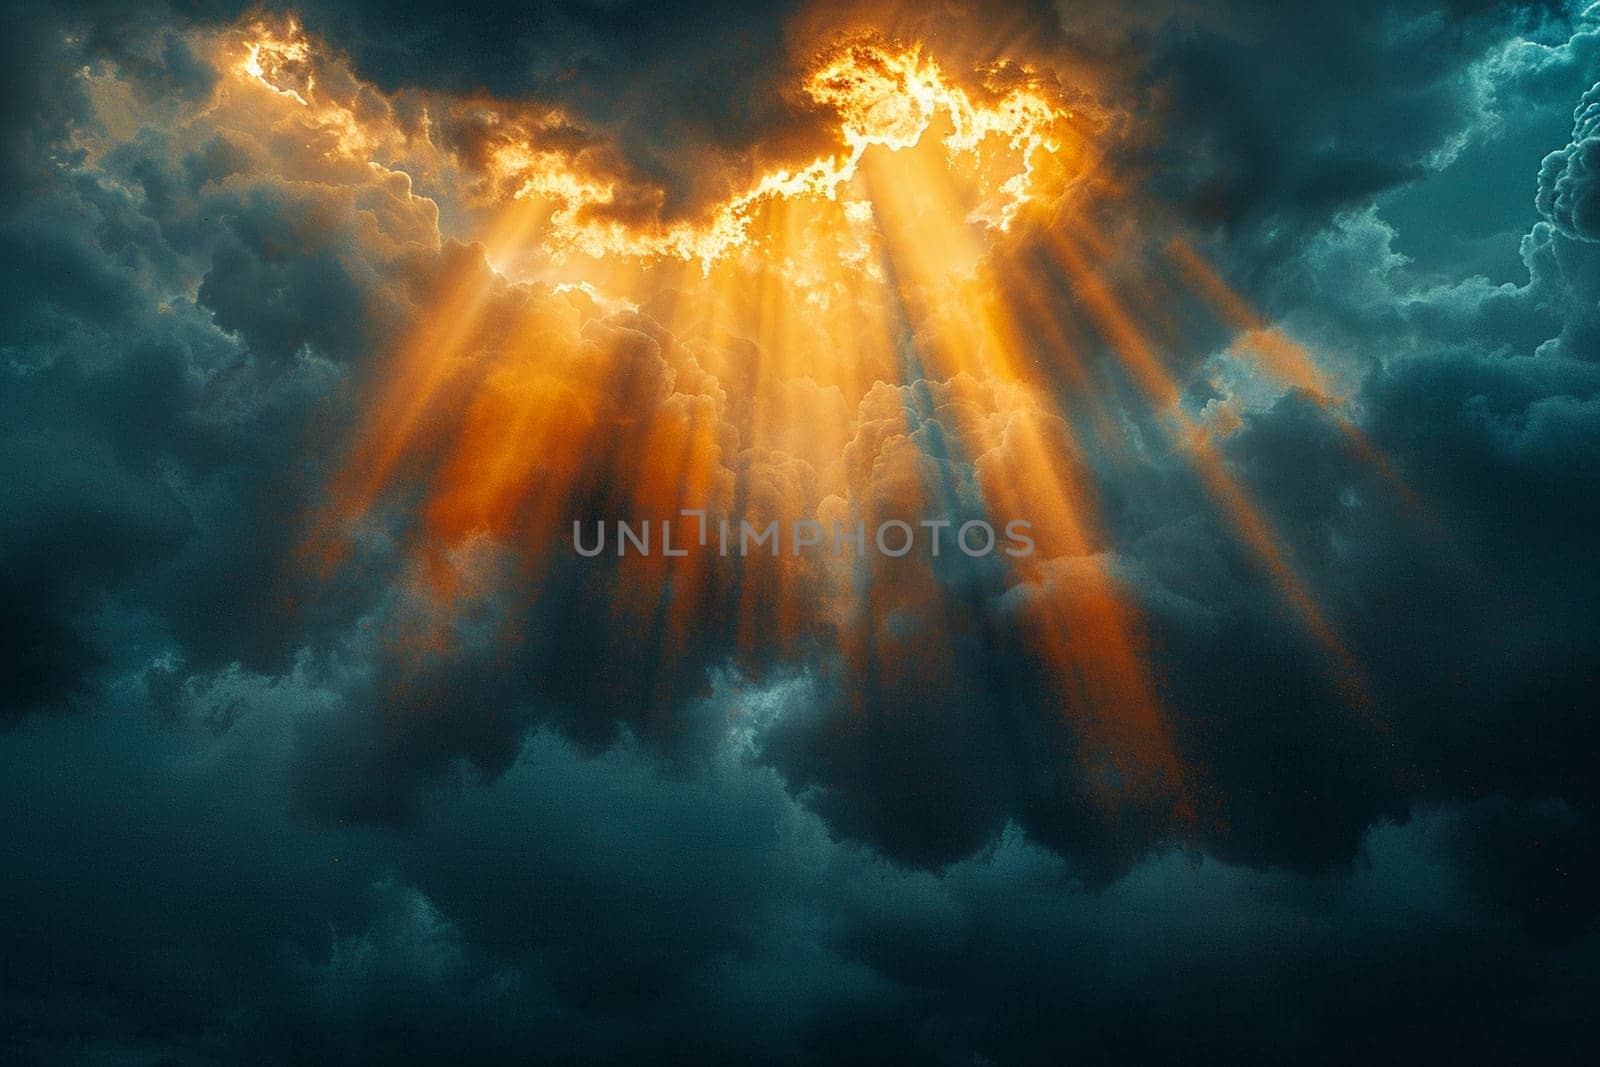 Sunbeams breaking through dark clouds after a storm, symbolizing hope and renewal.